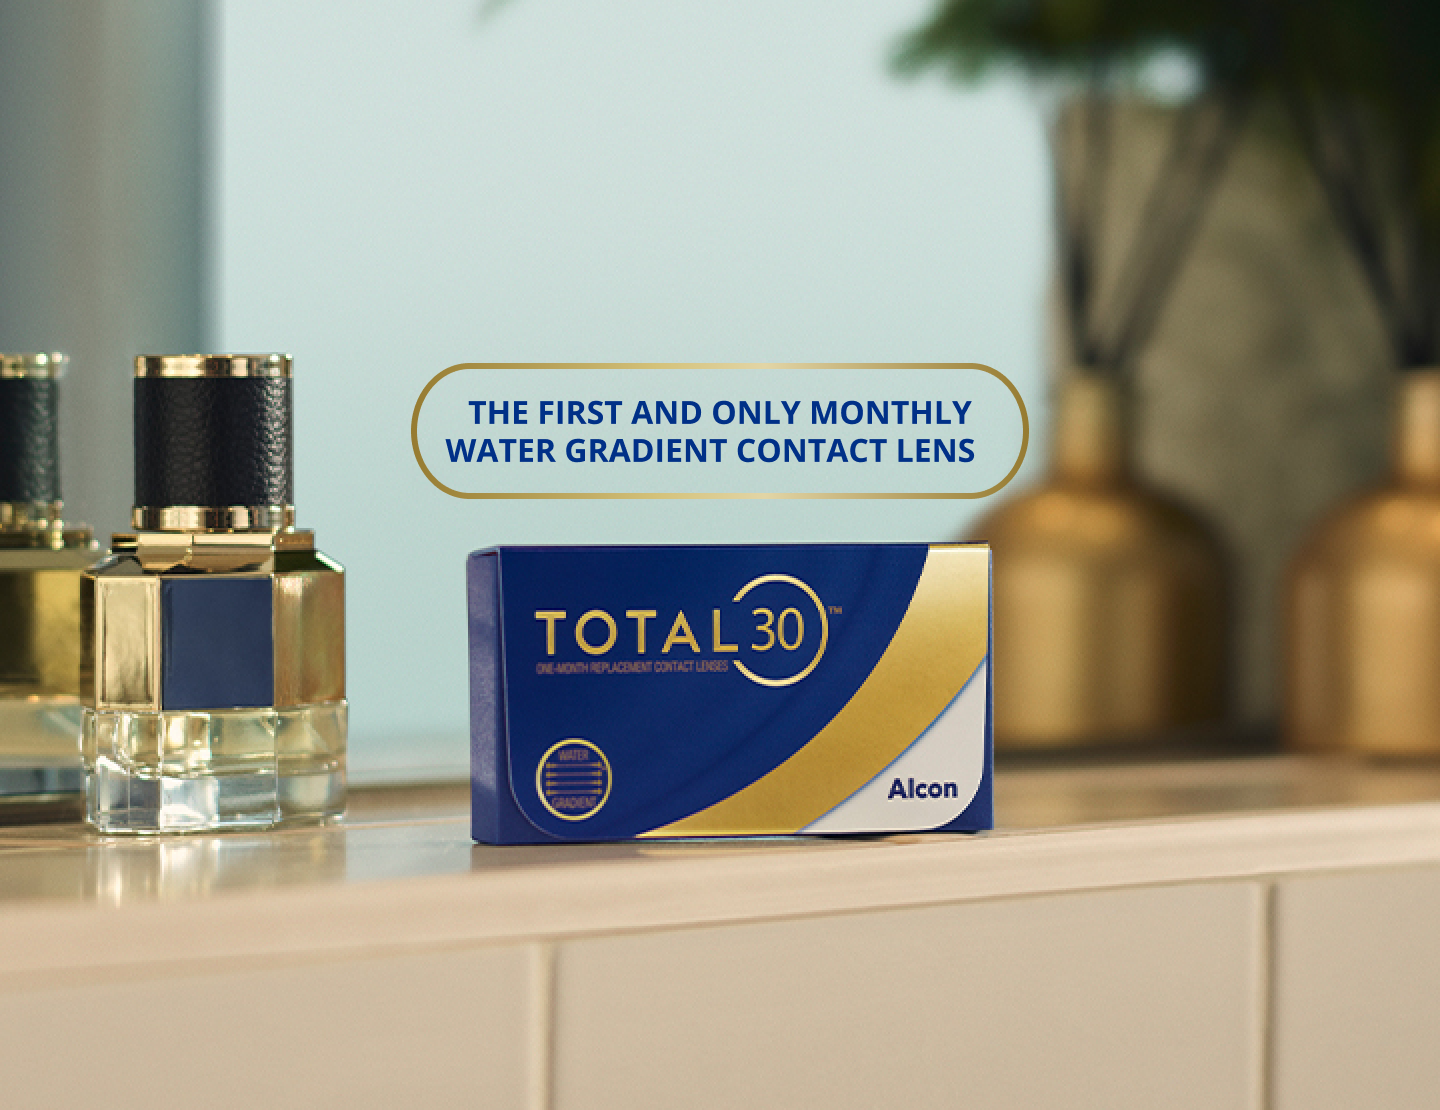 Total30 UK product box on counter, the first and only monthly Water Gradient contact lens